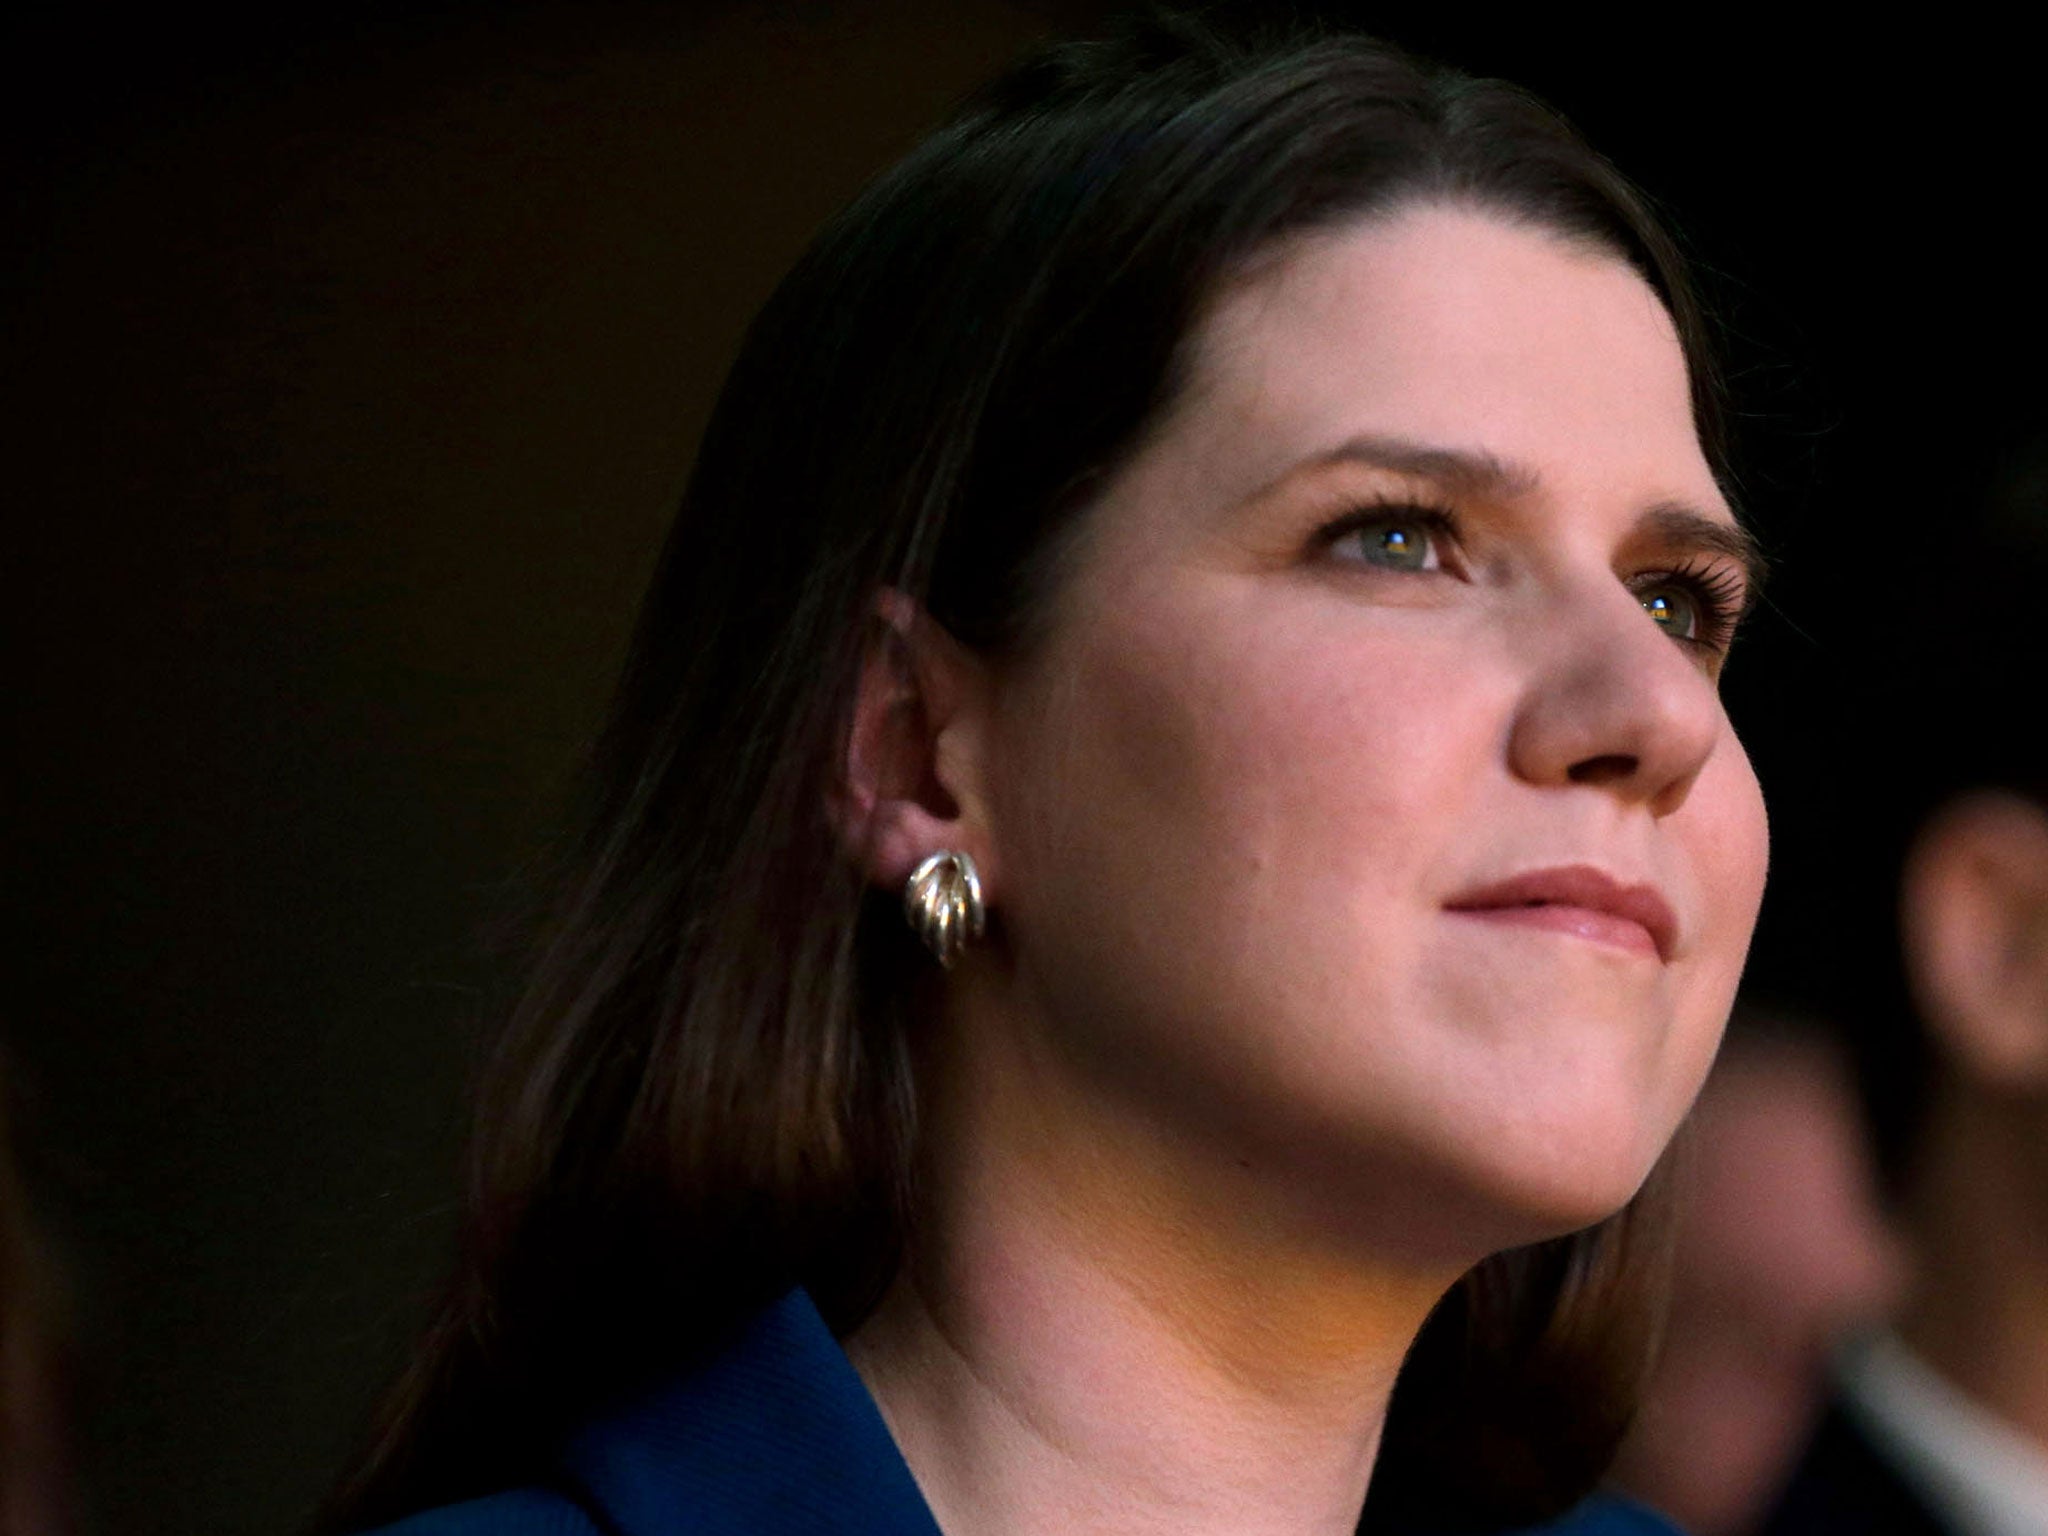 The Employment Minister Jo Swinson is recovering after suffering an allergic reaction